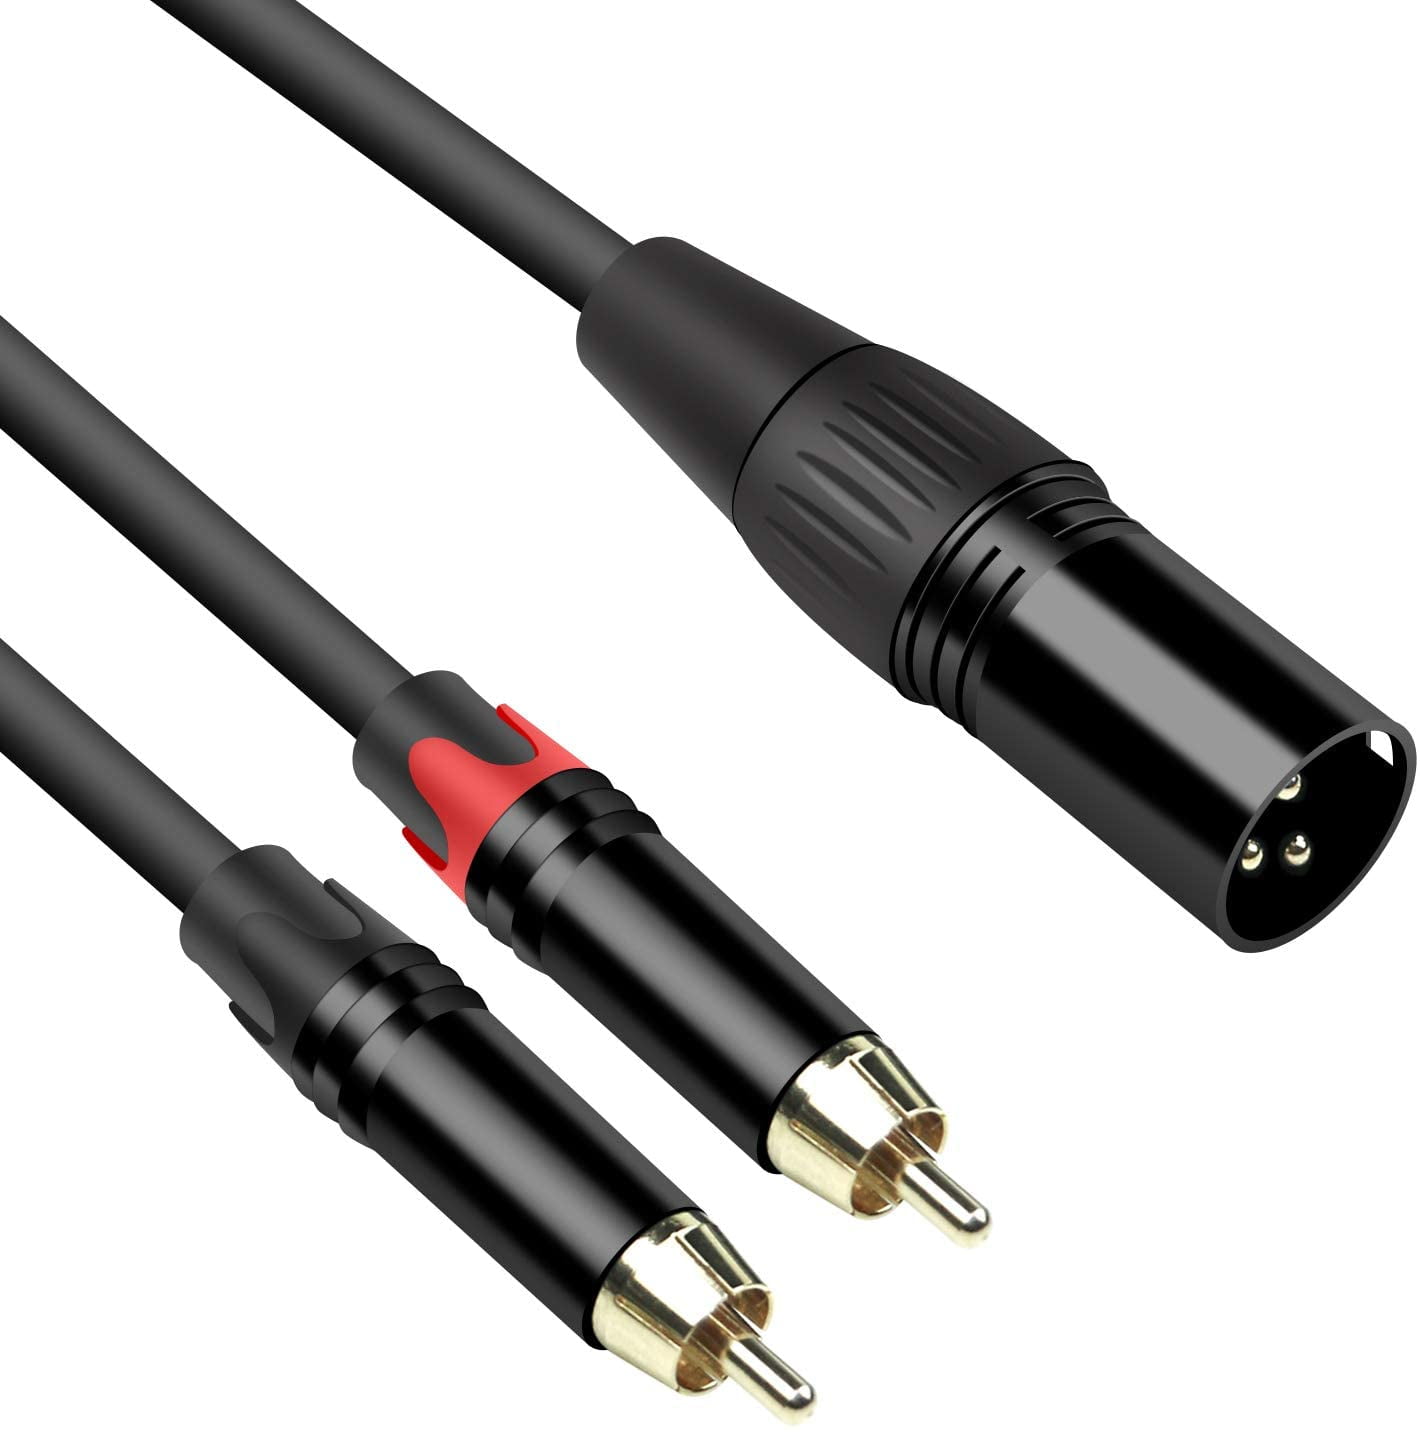 XLR Y Cable, One XLR Male to Dual RCA Male Plugs 1 ft. Long